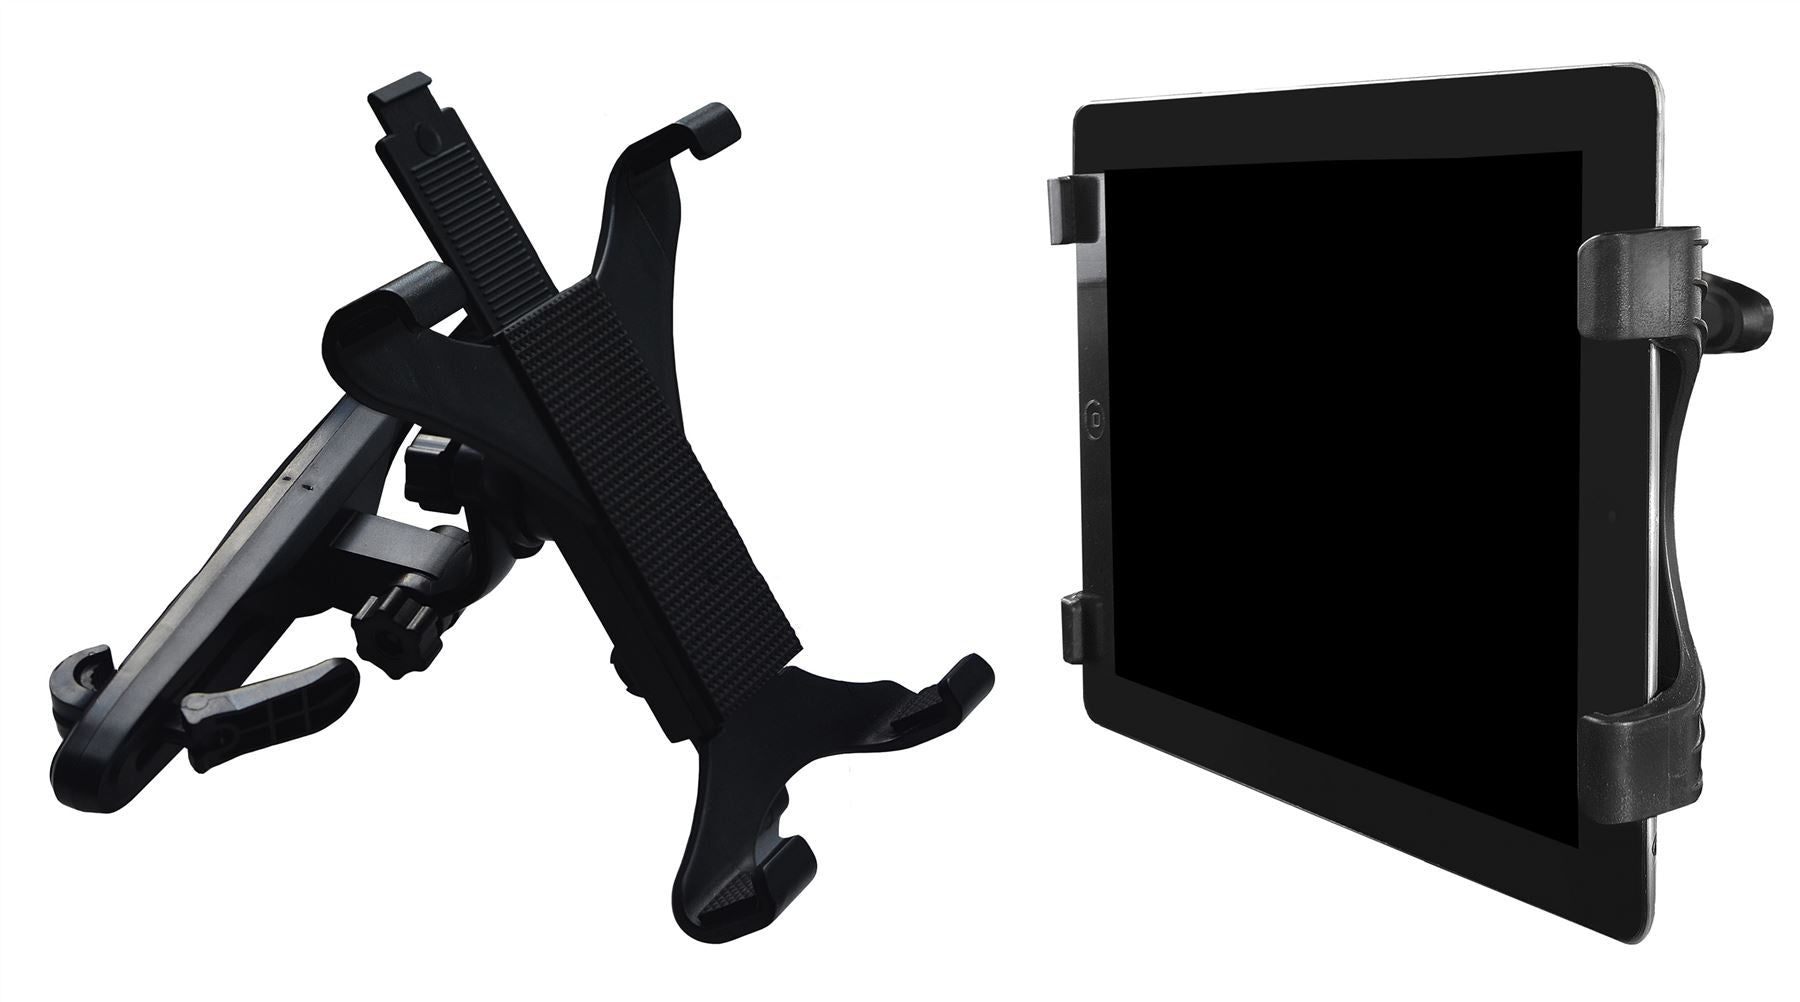 Universal Portable Tablet Stand 7-10.1 - Black